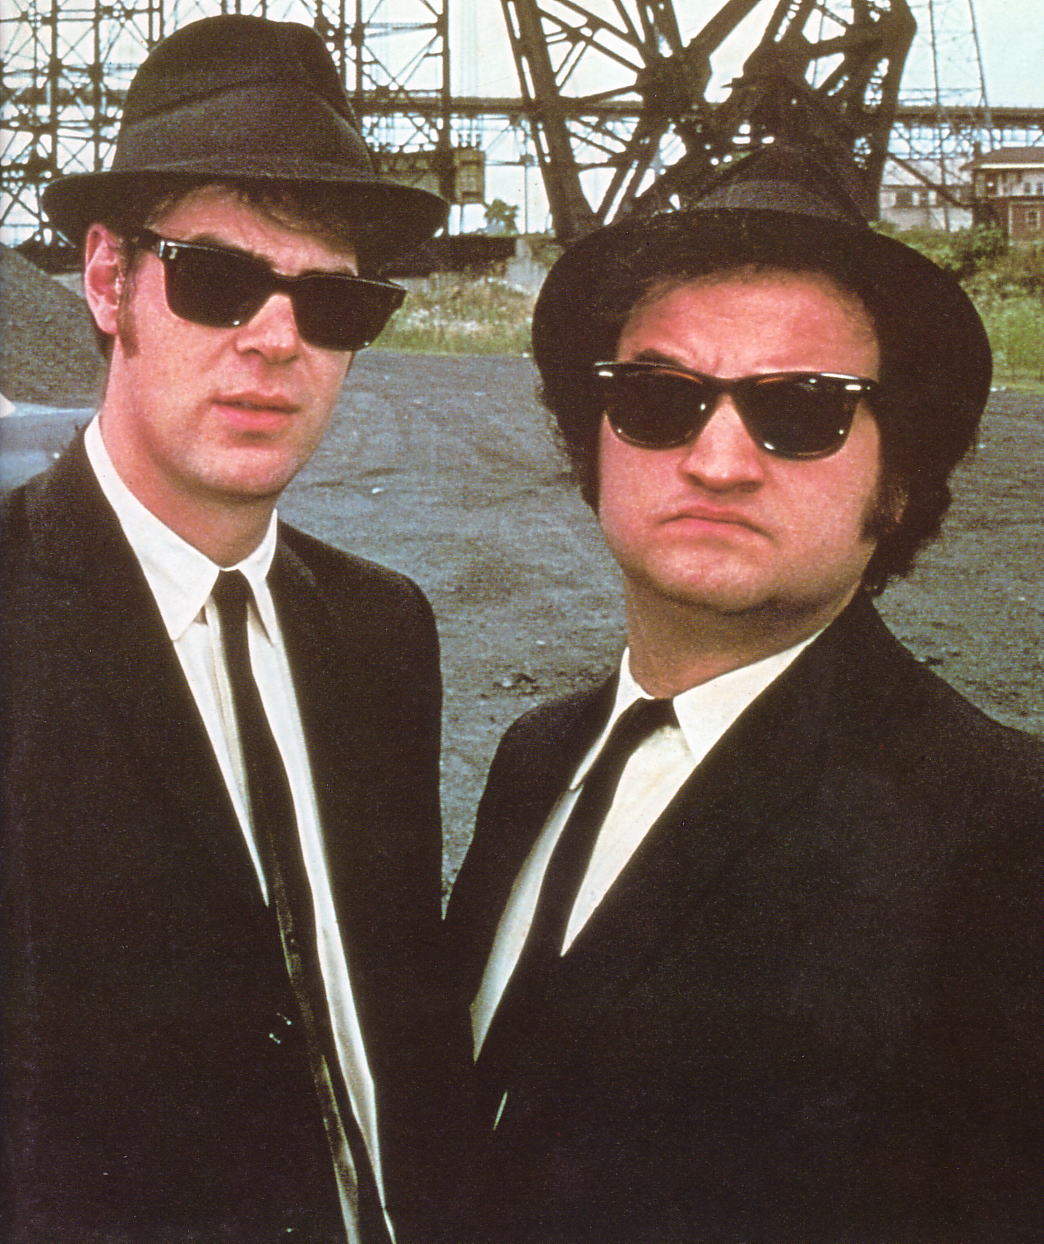 IMAGE(http://cdn4.openculture.com/wp-content/uploads/2013/01/blues-brothers.jpeg)